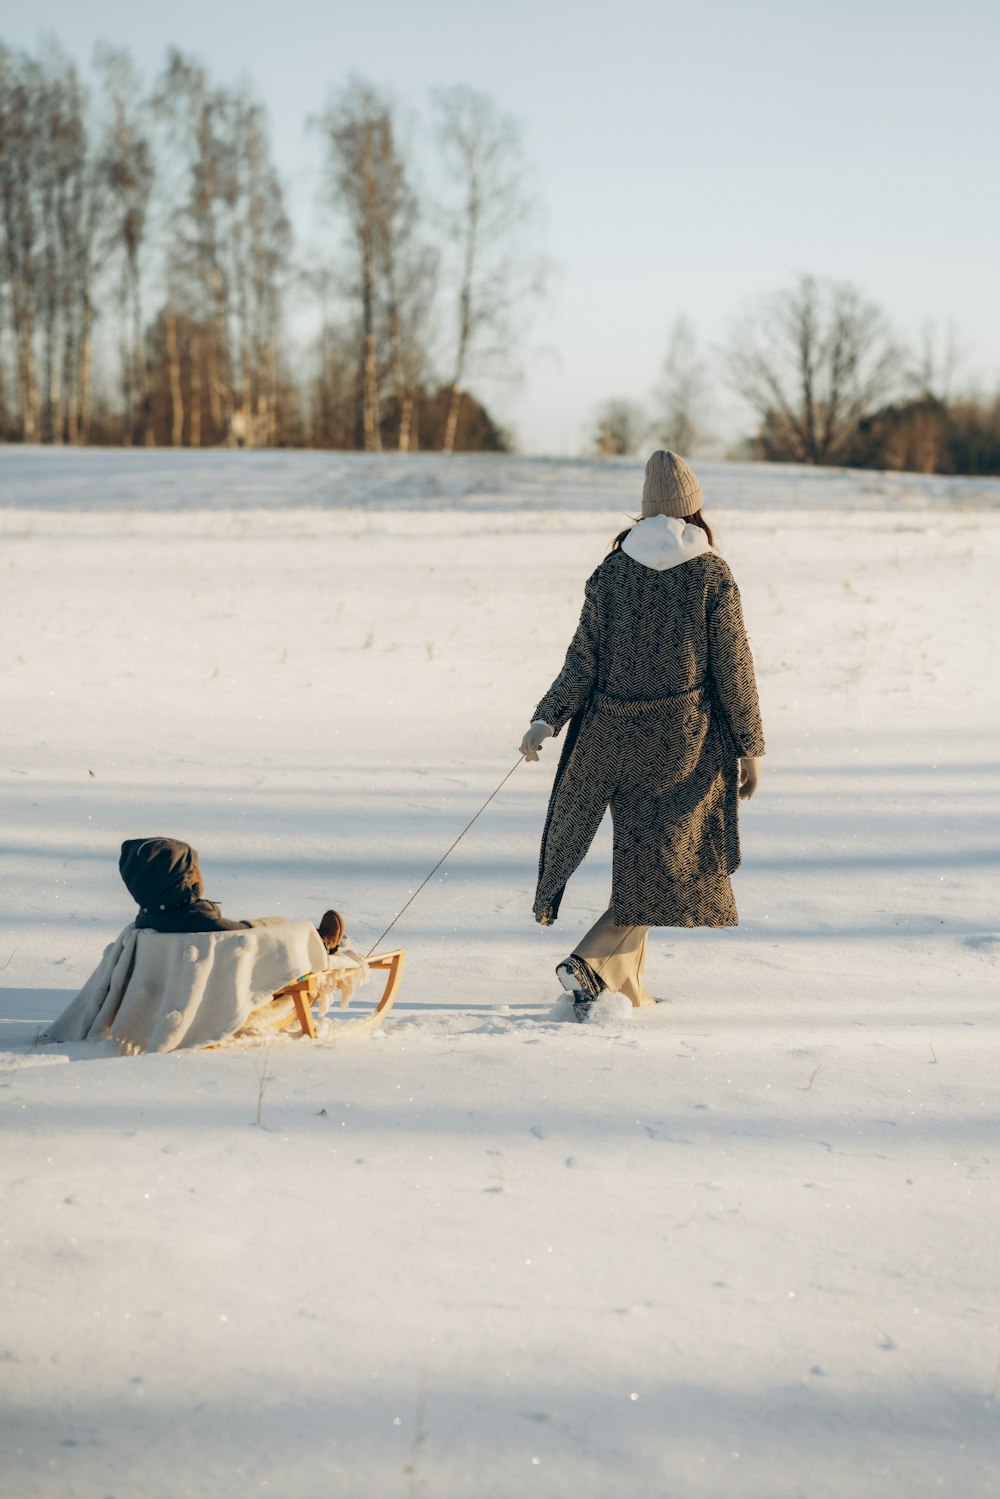 a woman pulling a child on a sled in the snow